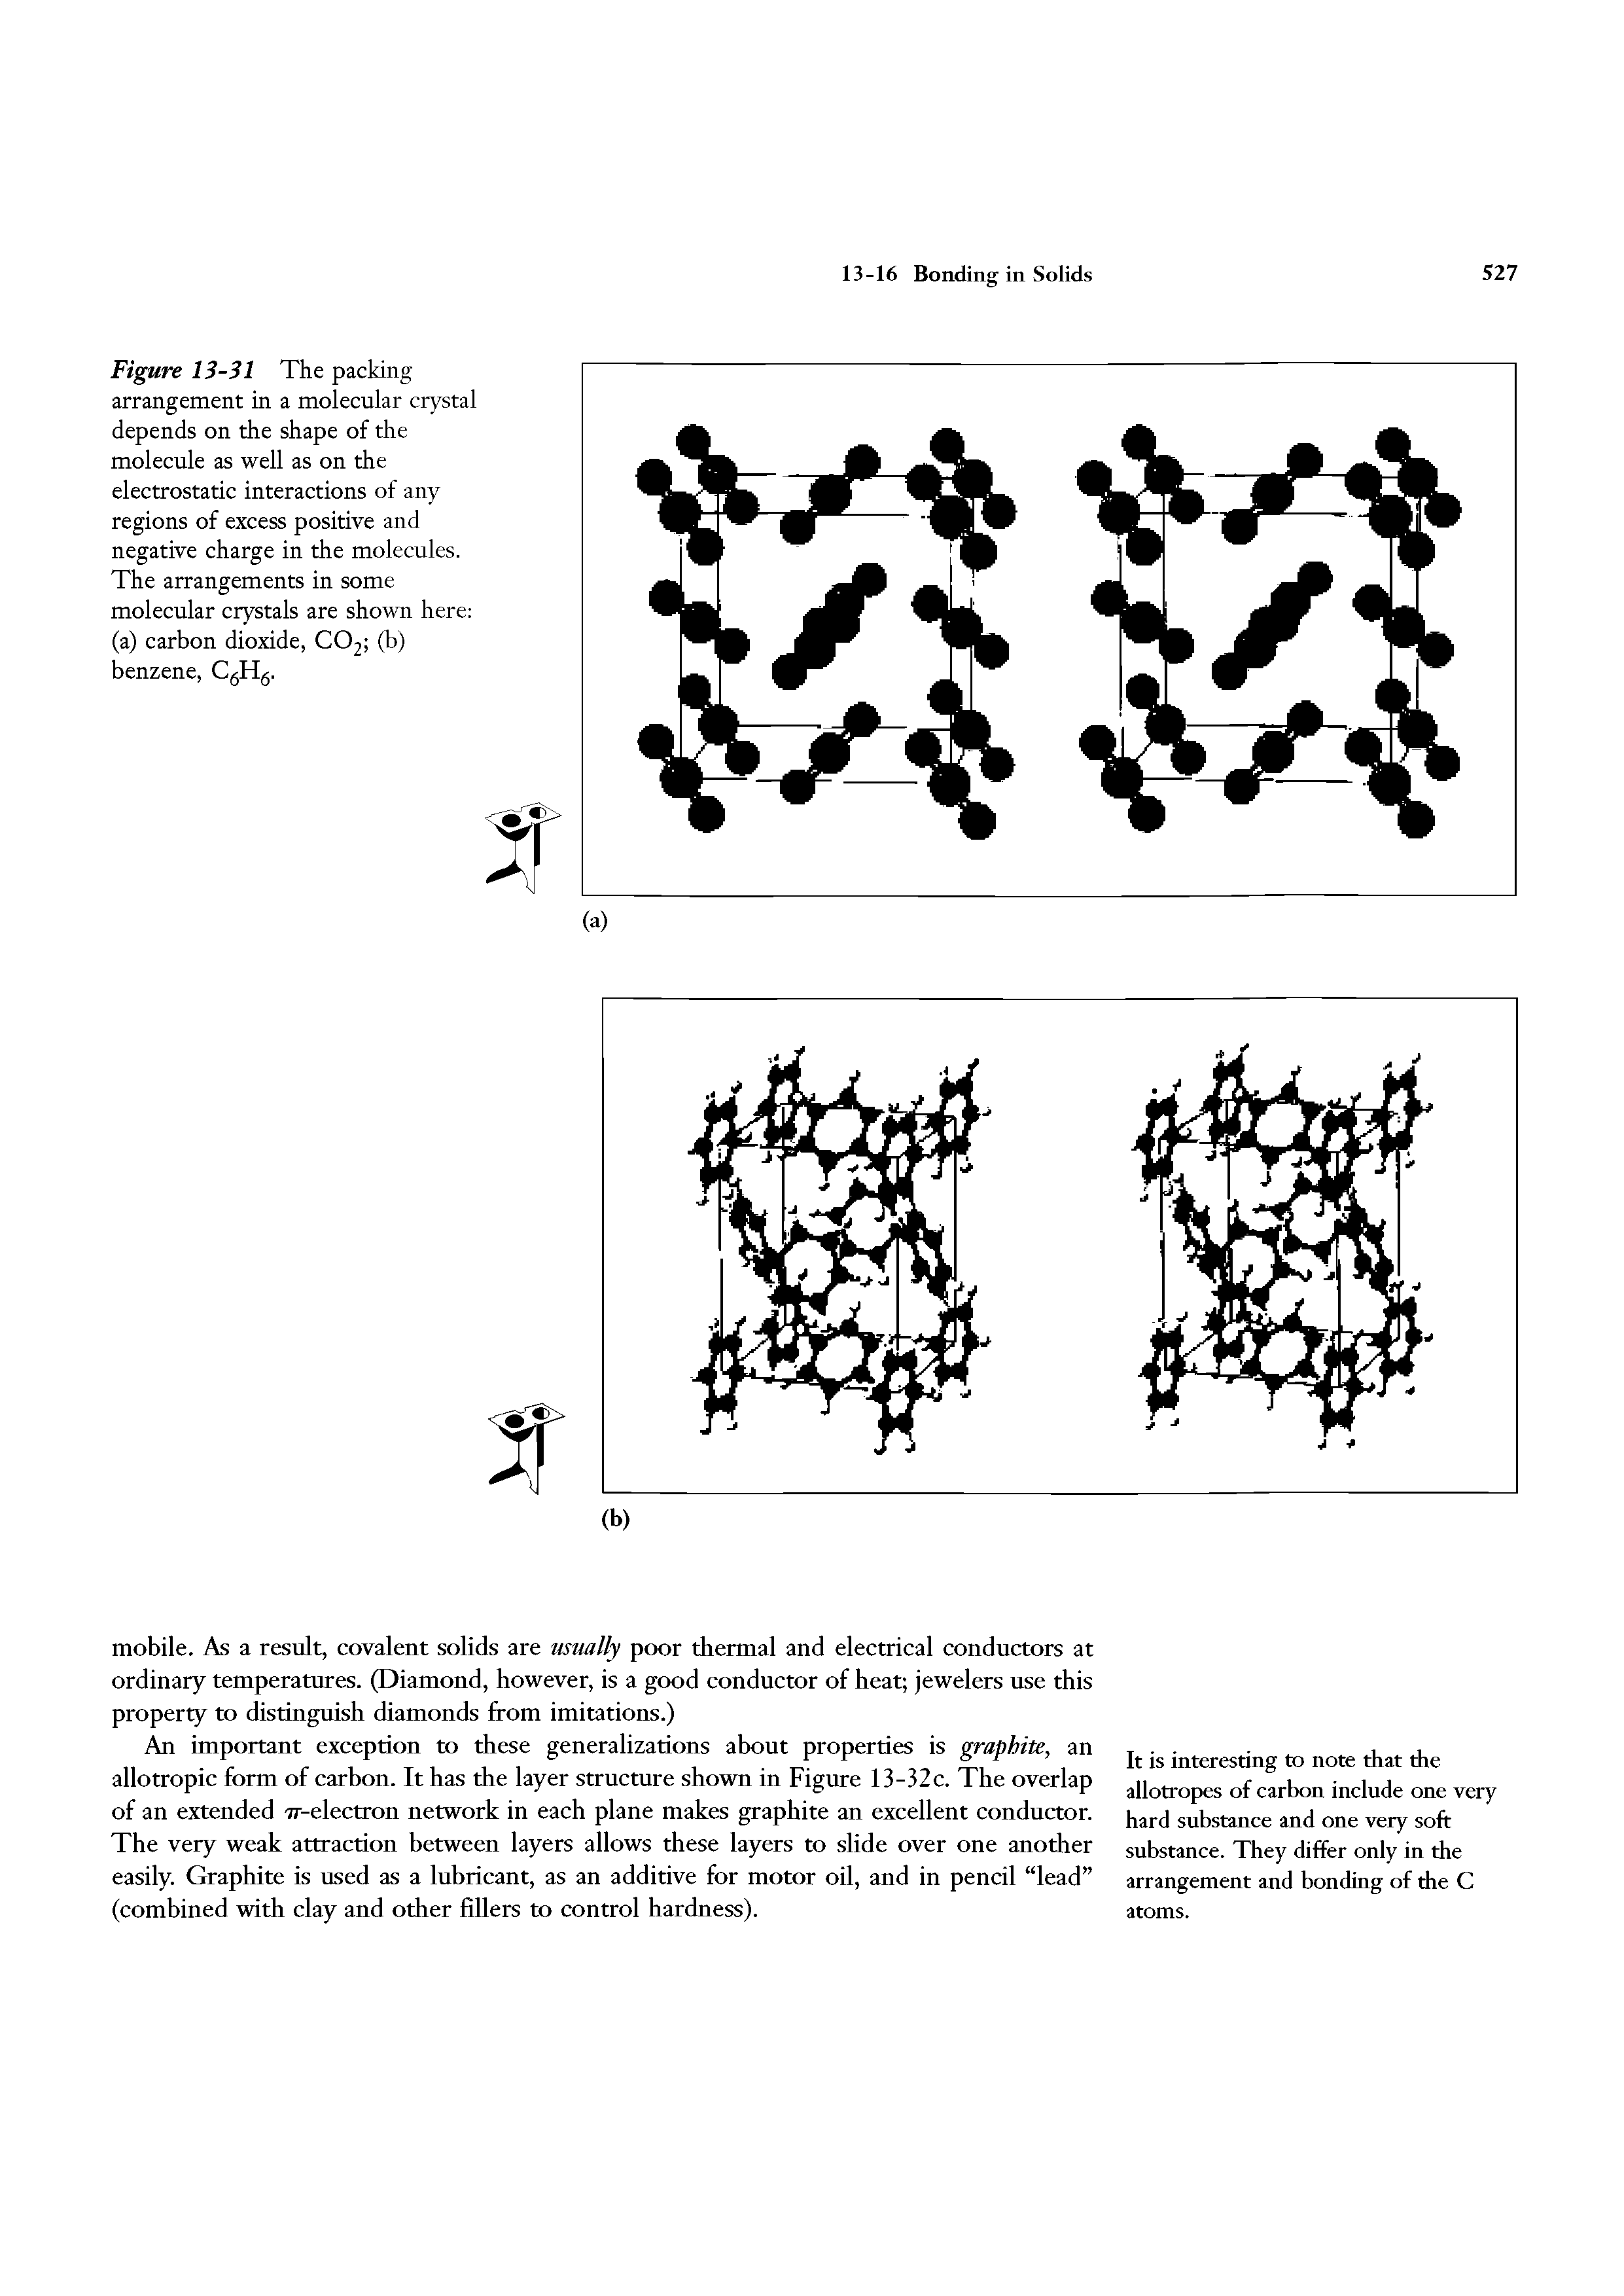 Figure 13-31 The packing arrangement in a molecular crystal depends on the shape of the molecule as well as on the electrostatic interactions of any regions of excess positive and negative charge in the molecules. The arrangements in some molecular crystals are shown here (a) carbon dioxide, CO2 (b) benzene, CgHg.